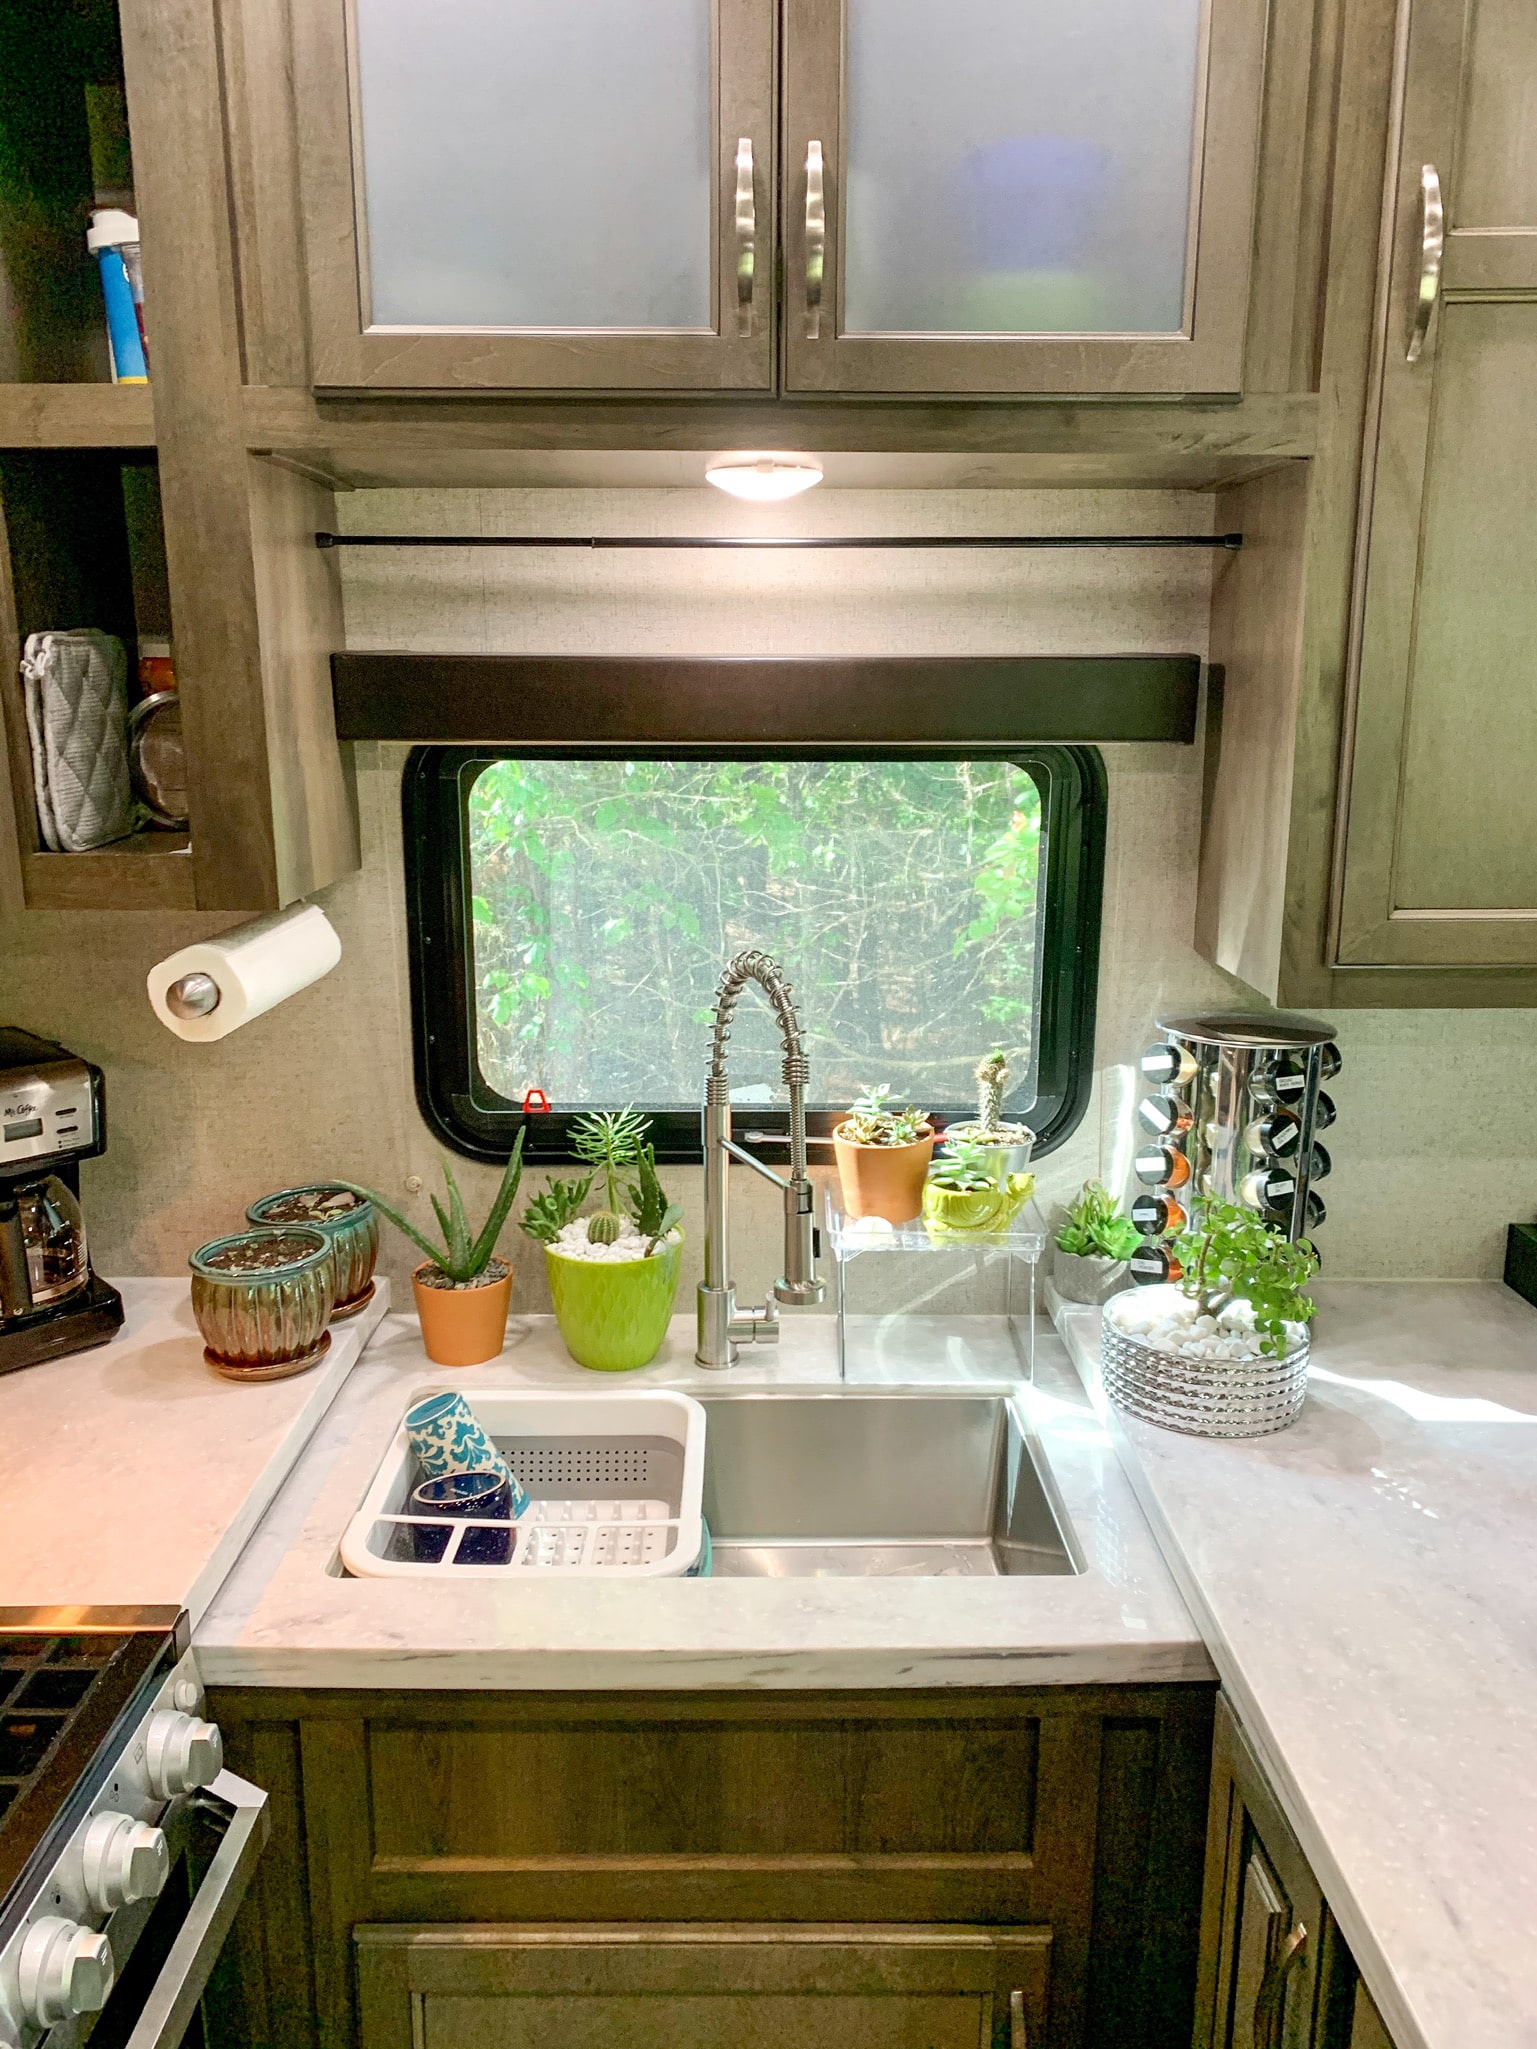 RV kitchen decorated with plants